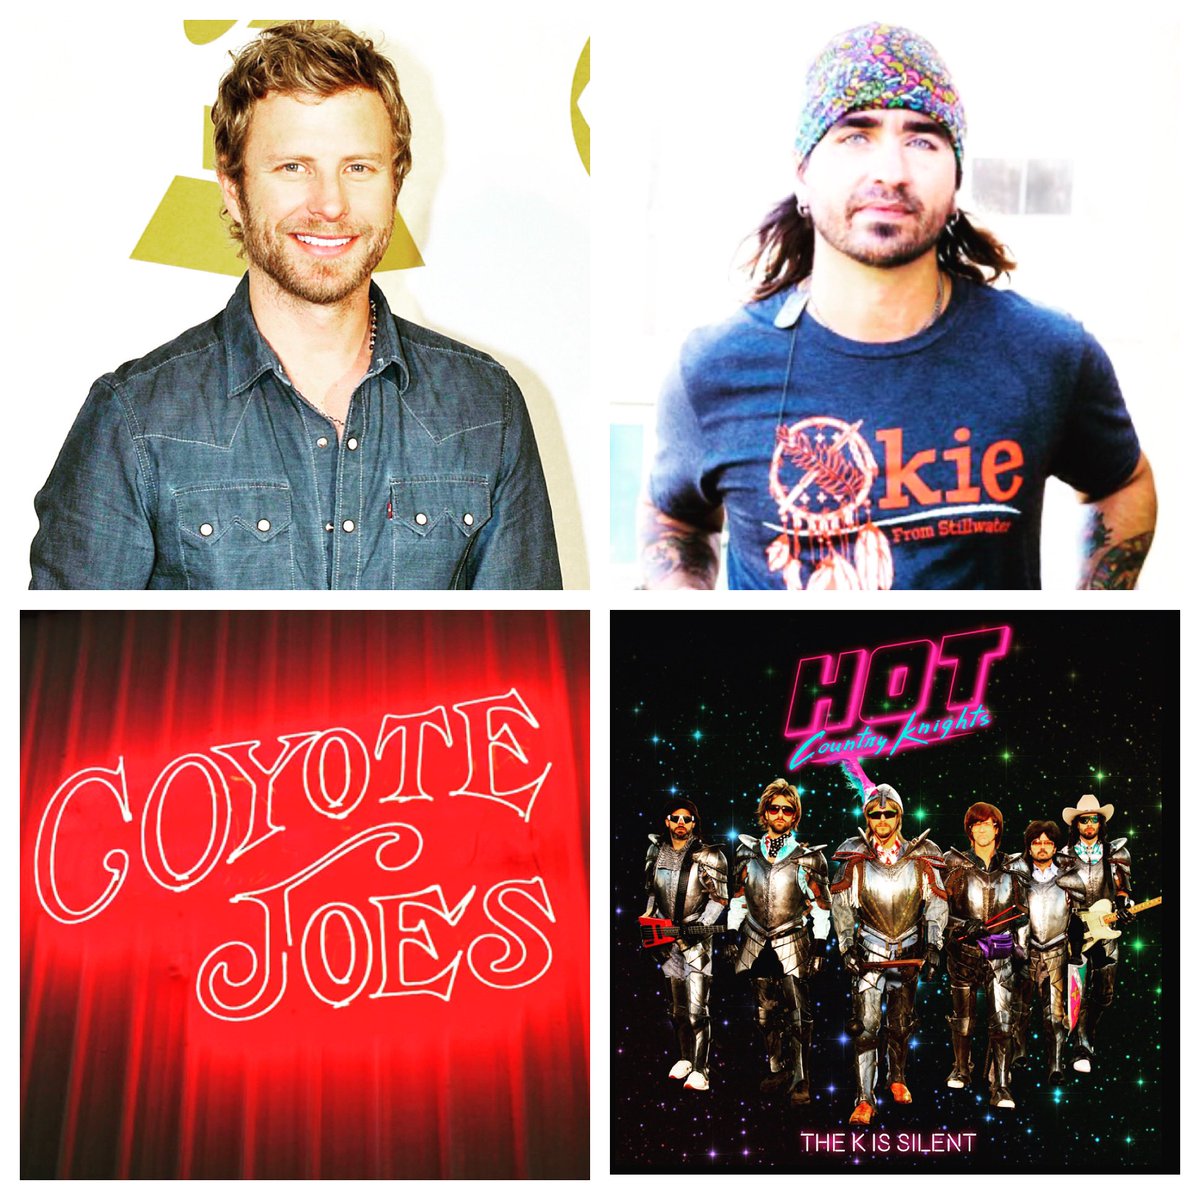 TONIGHT (5/13) the #HighTimesandHangovers tour makes a stop at @coyotejoes in Charlotte w/ @DierksBentley @departed_music & (fingers crossed) the #HotCountryKnights! #RedDirtNC